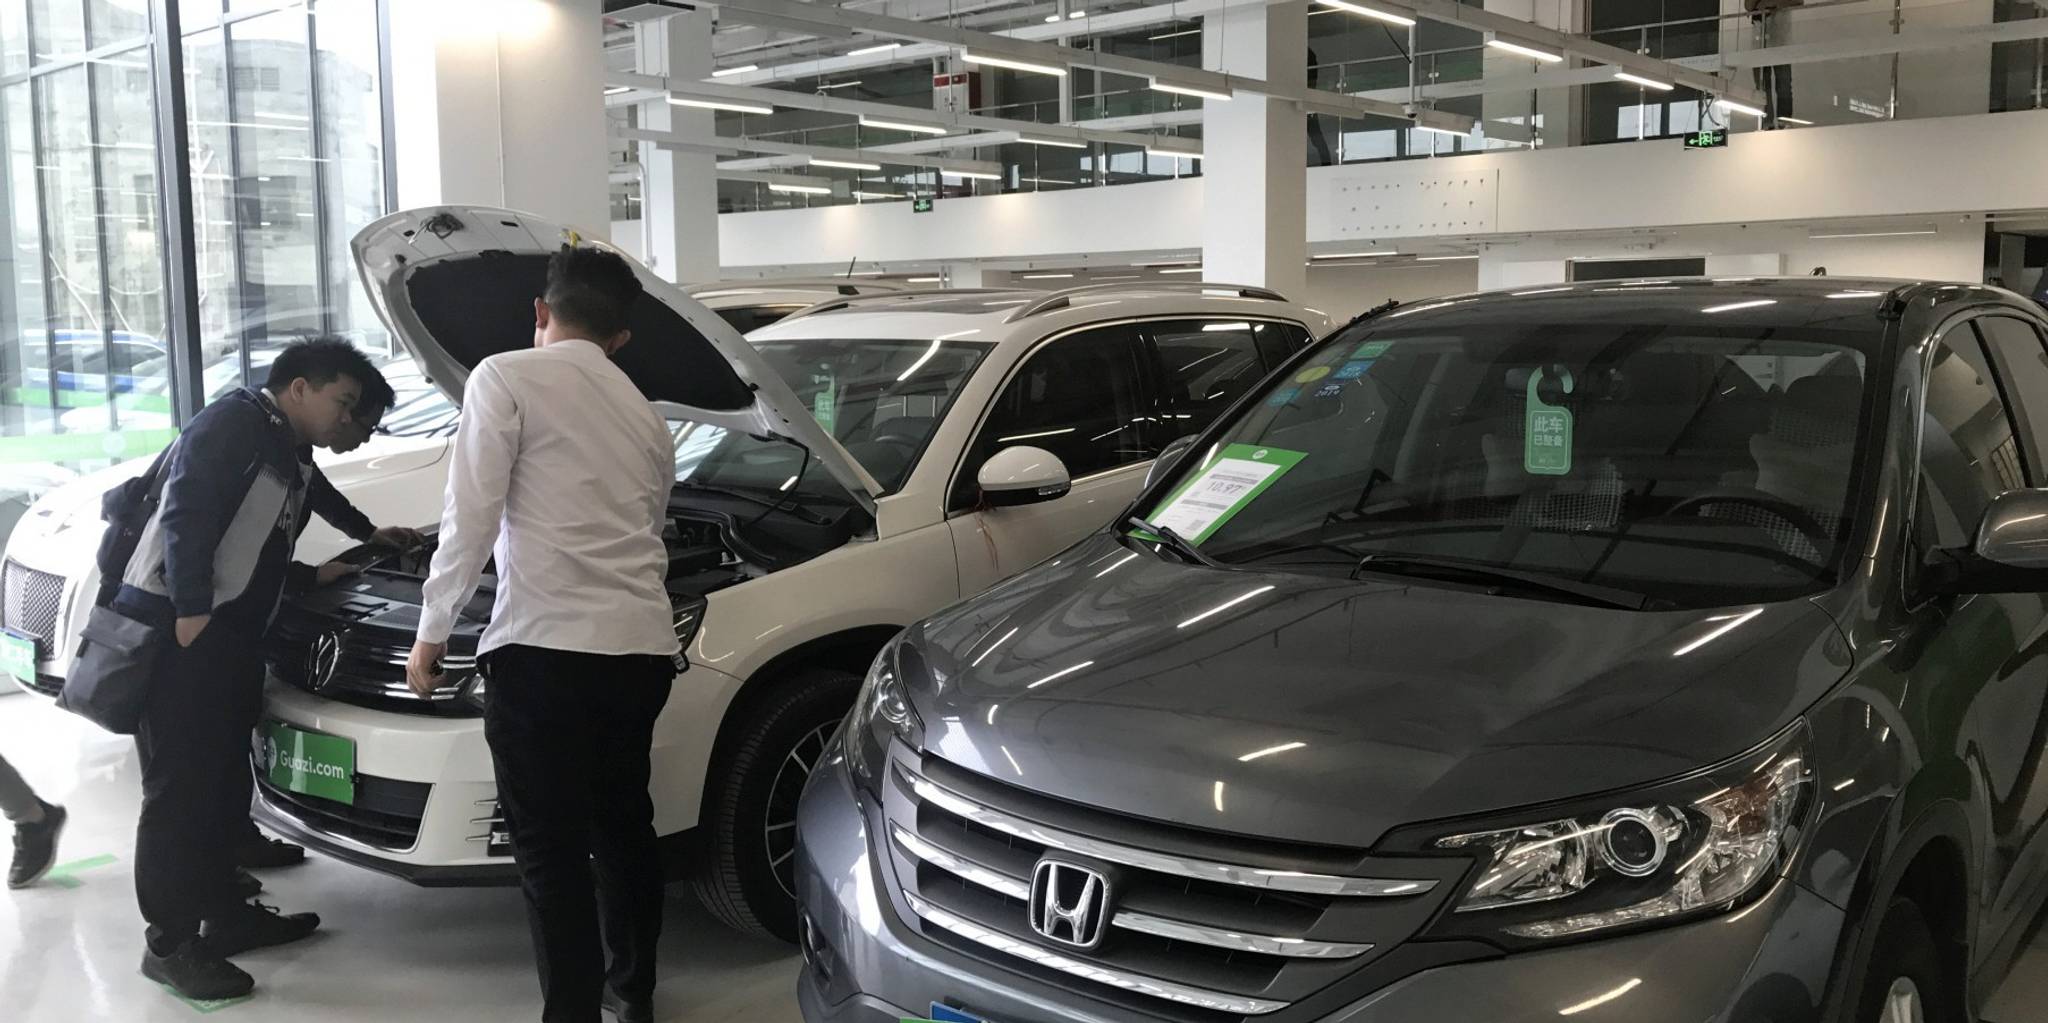 Guazi: expanding used car sales for Chinese motorists